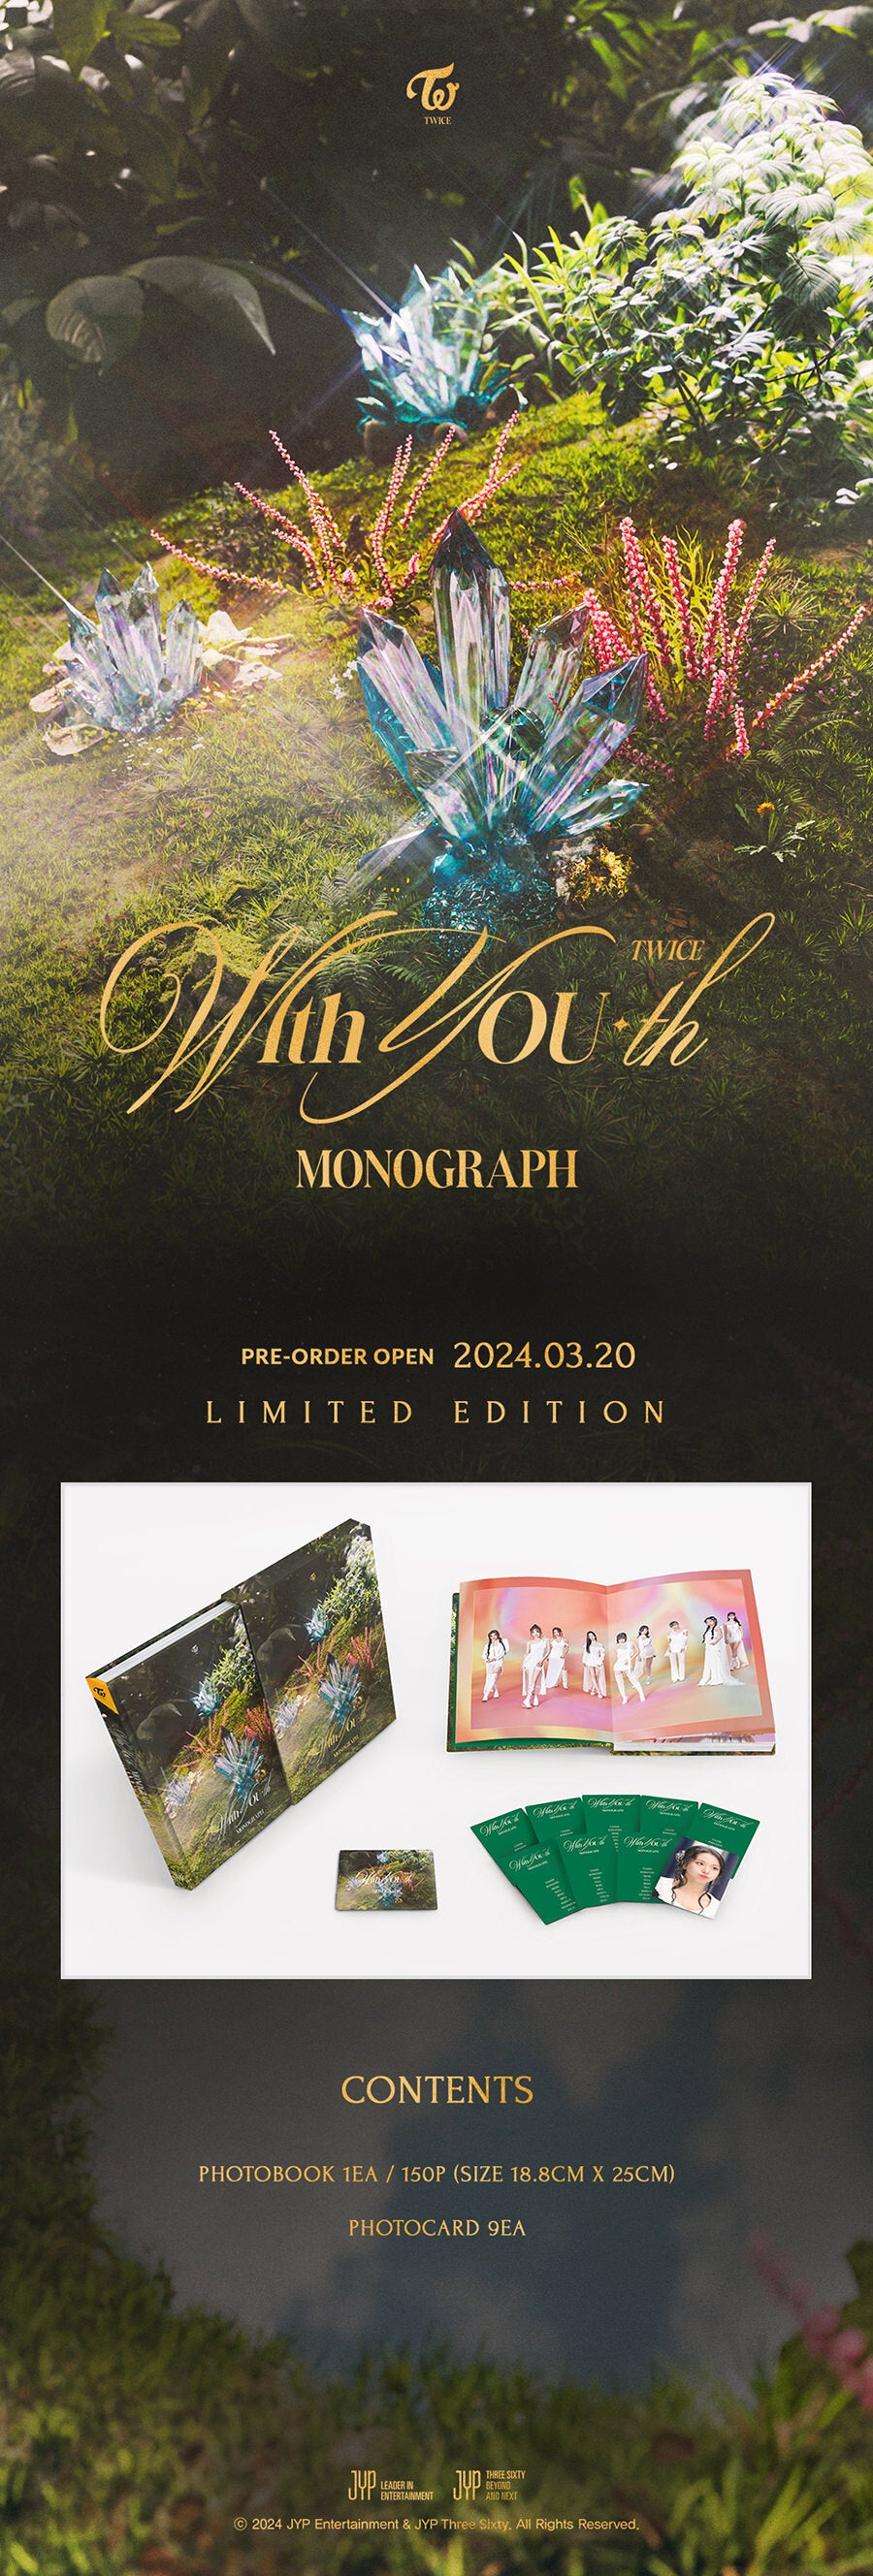 TWICE MONOGRAPH 'WITH YOU-TH' DETAIL